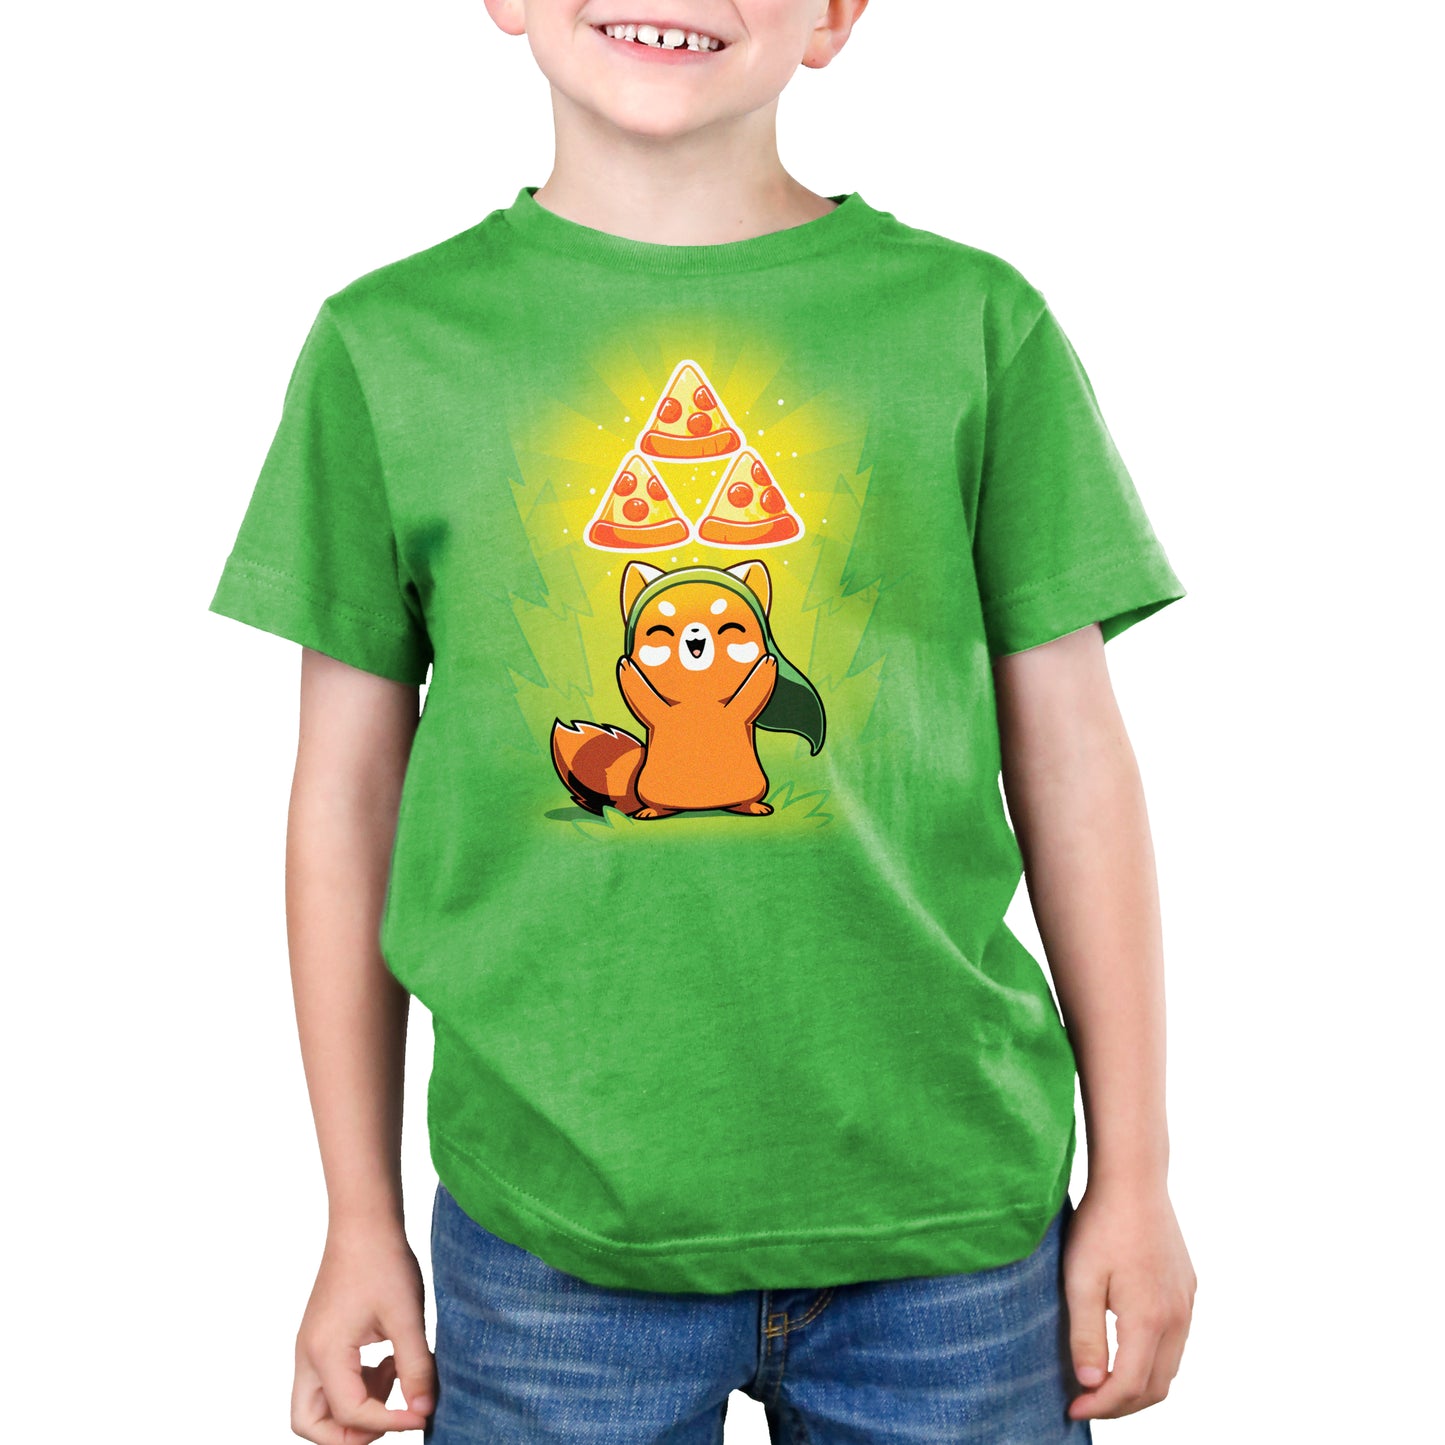 Premium Cotton T-shirt - A child wears an apple green apparel, made from super soft ringspun cotton, featuring a cartoon orange creature holding three slices of pizza above its head. The child is smiling, and the apparel's vibrant and playful design truly showcases "The Power of Pizza" apparel by monsterdigital.